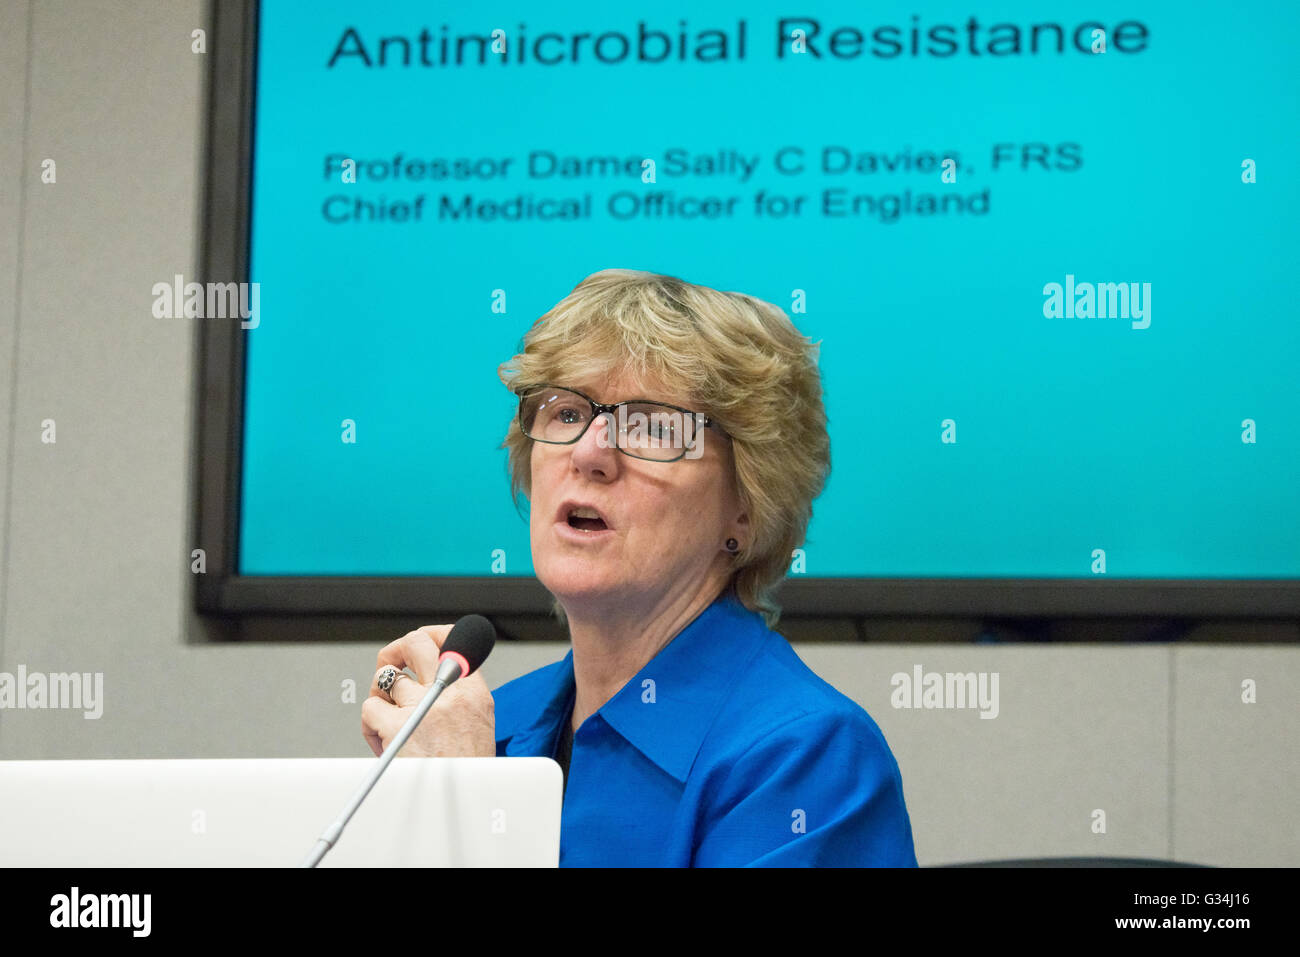 New York, United States. 07th June, 2016. Dame Sally Davies speaks with the press, explaining the origins and mechanisms of transmission of anti-microbial resistance. The Permanent Mission of the United Kingdom to the United Nations convened a press briefing at UN Headquarters in New York City on anti-microbial resistance diseases and threats to global health posed by them featuring Lord O'Neill, Chair of a Review of Anti-Microbial Resistance (AMR). Professor Dame Sally Davies, the Chief Medical Officer for England © Albin Lohr-Jones/Pacific Press/Alamy Live News Stock Photo